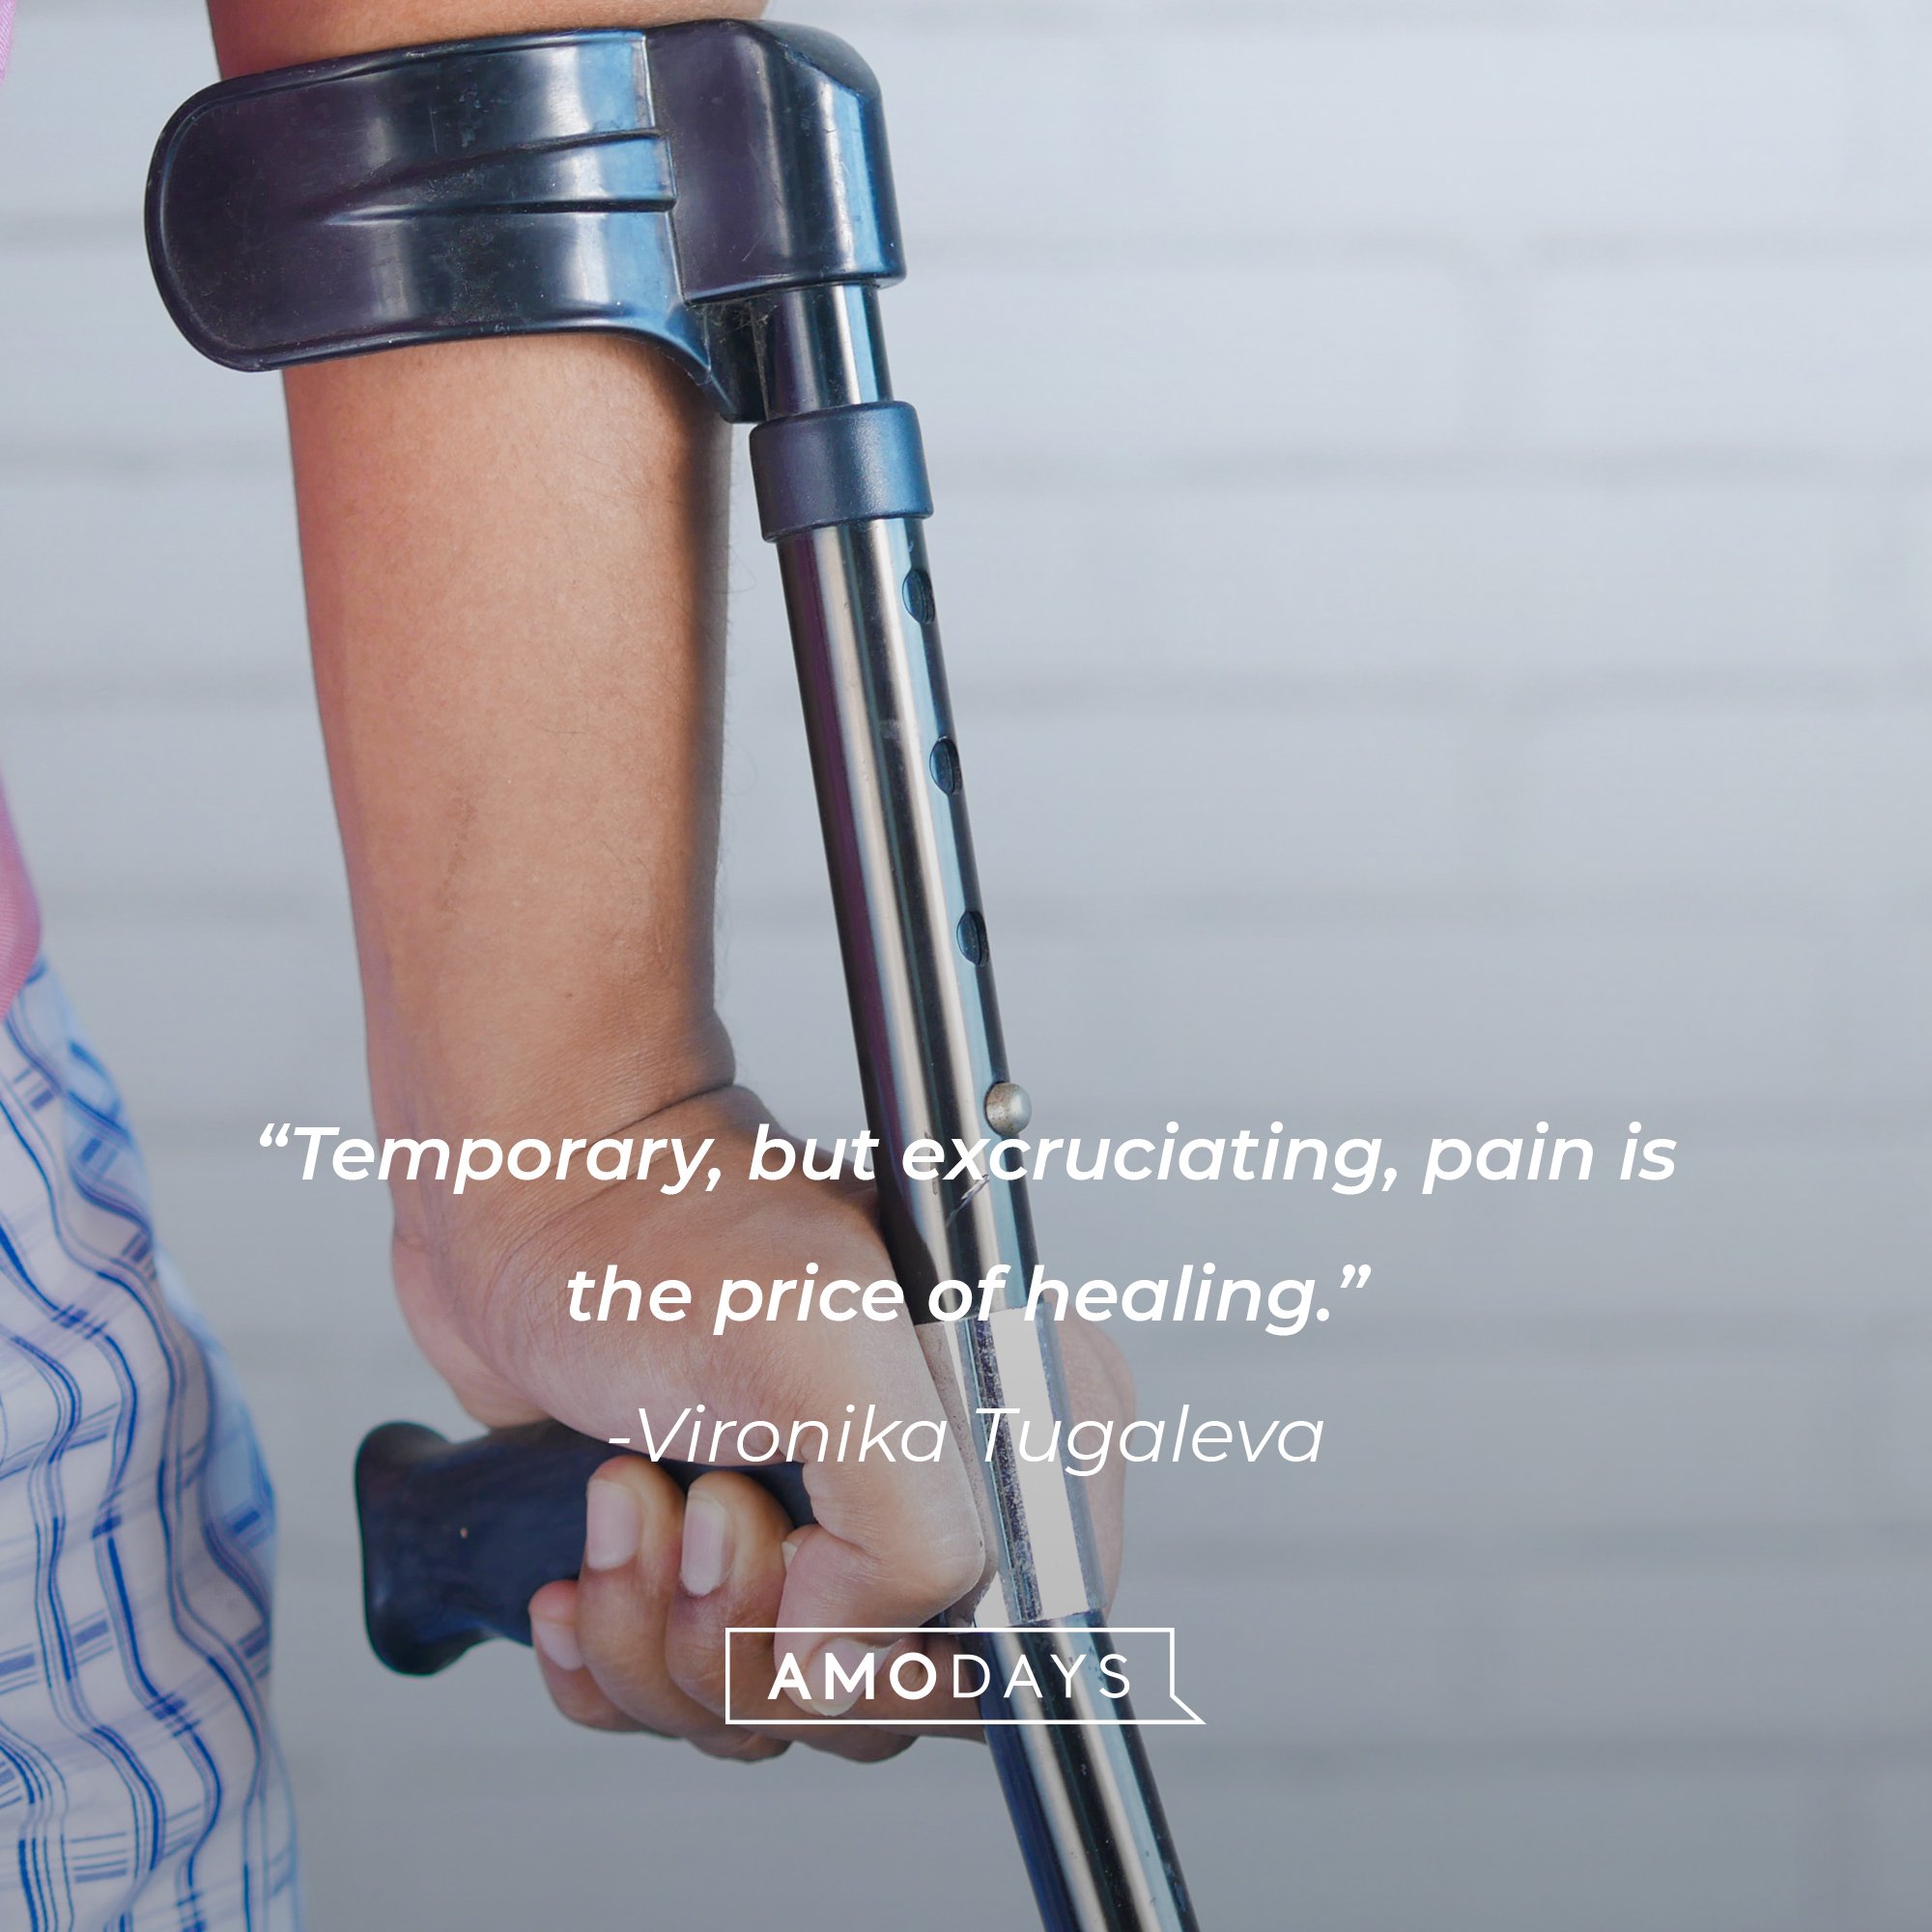 Vironika Tugaleva's quote: "Temporary, but excruciating, pain is the price of healing." | Image: AmoDays